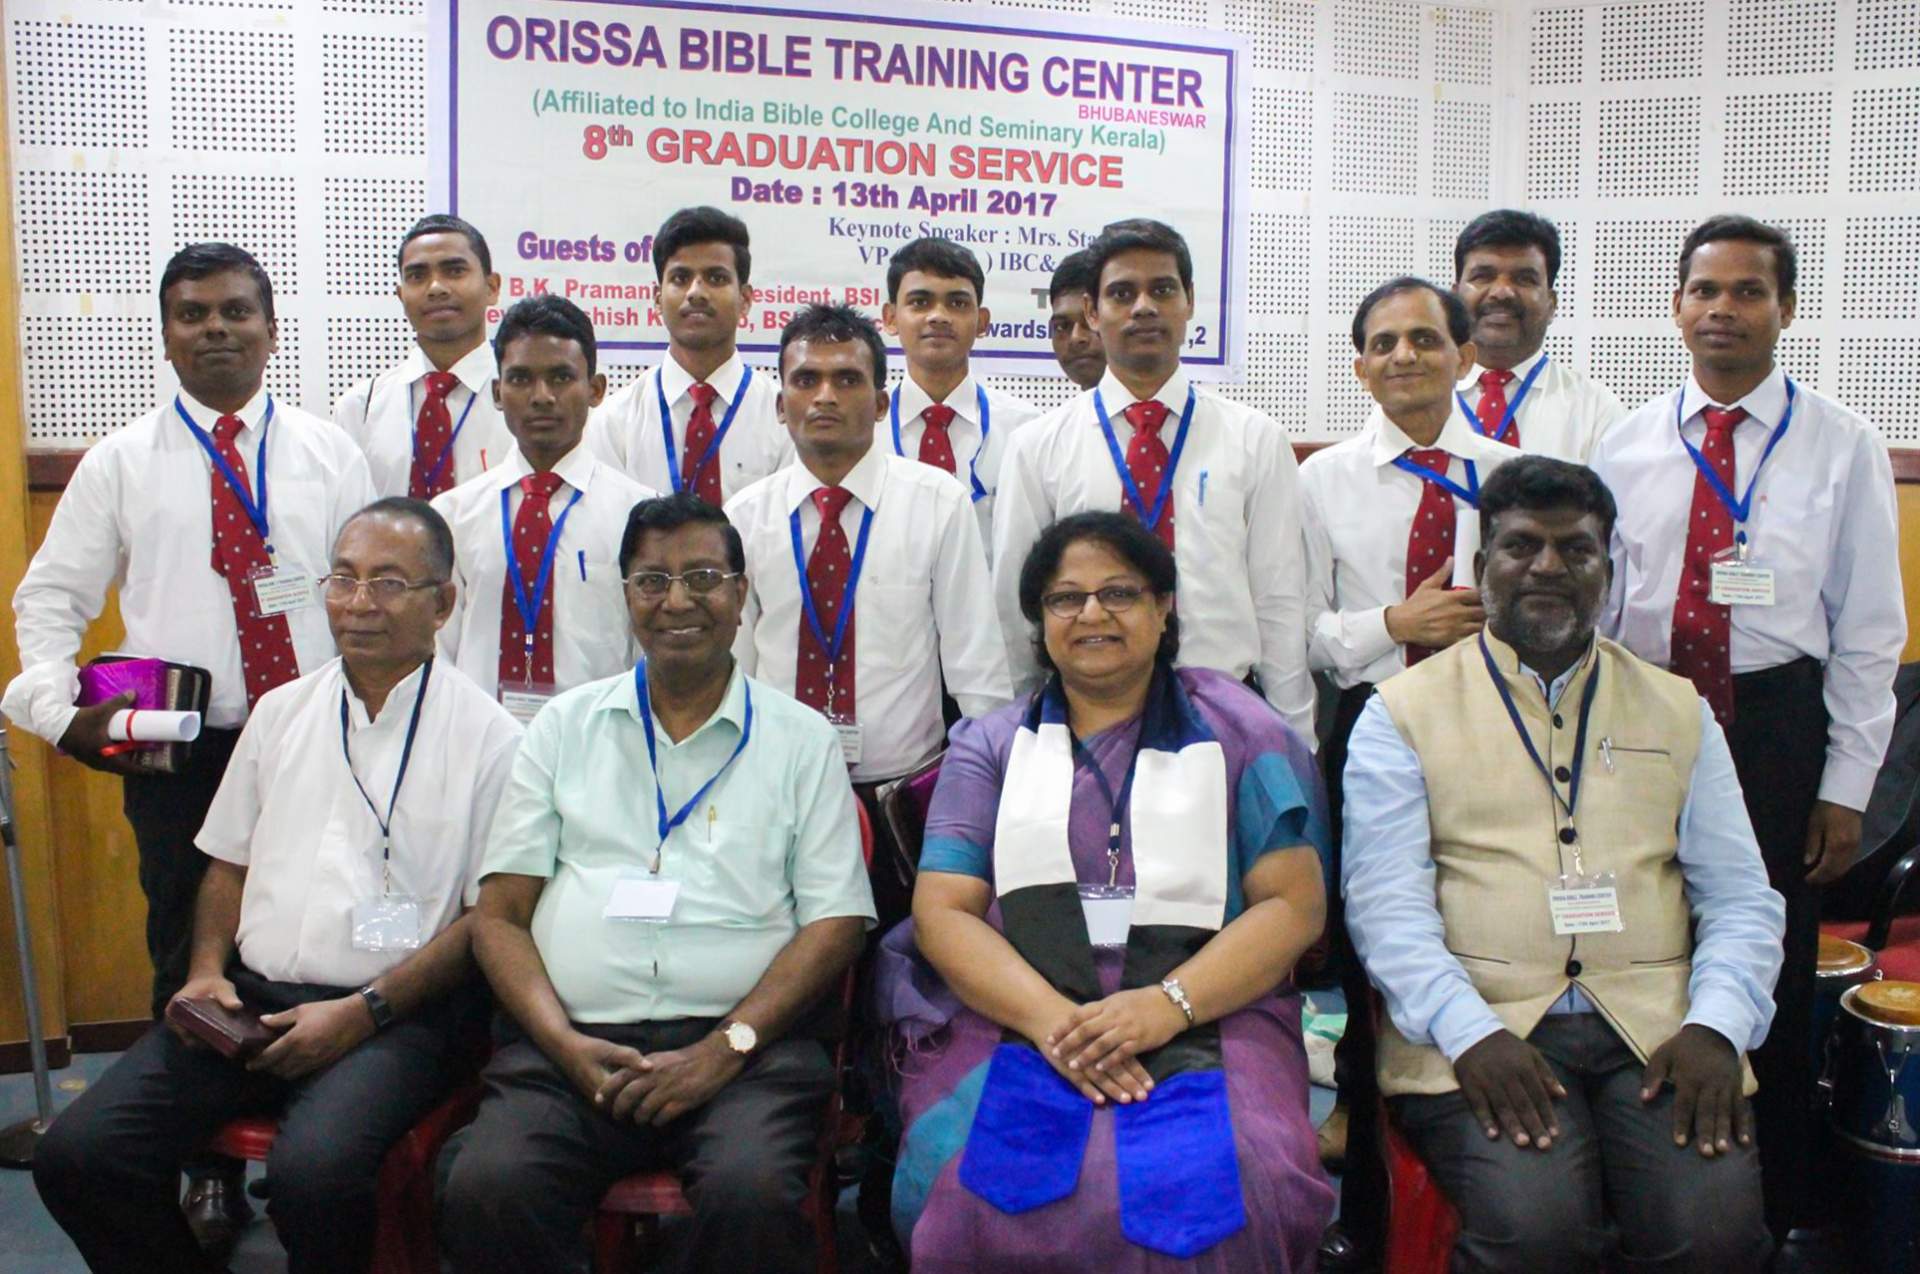 Odisha Bible Training Center graduates boldly share the Good News in spite of heavy government opposition against Christians.